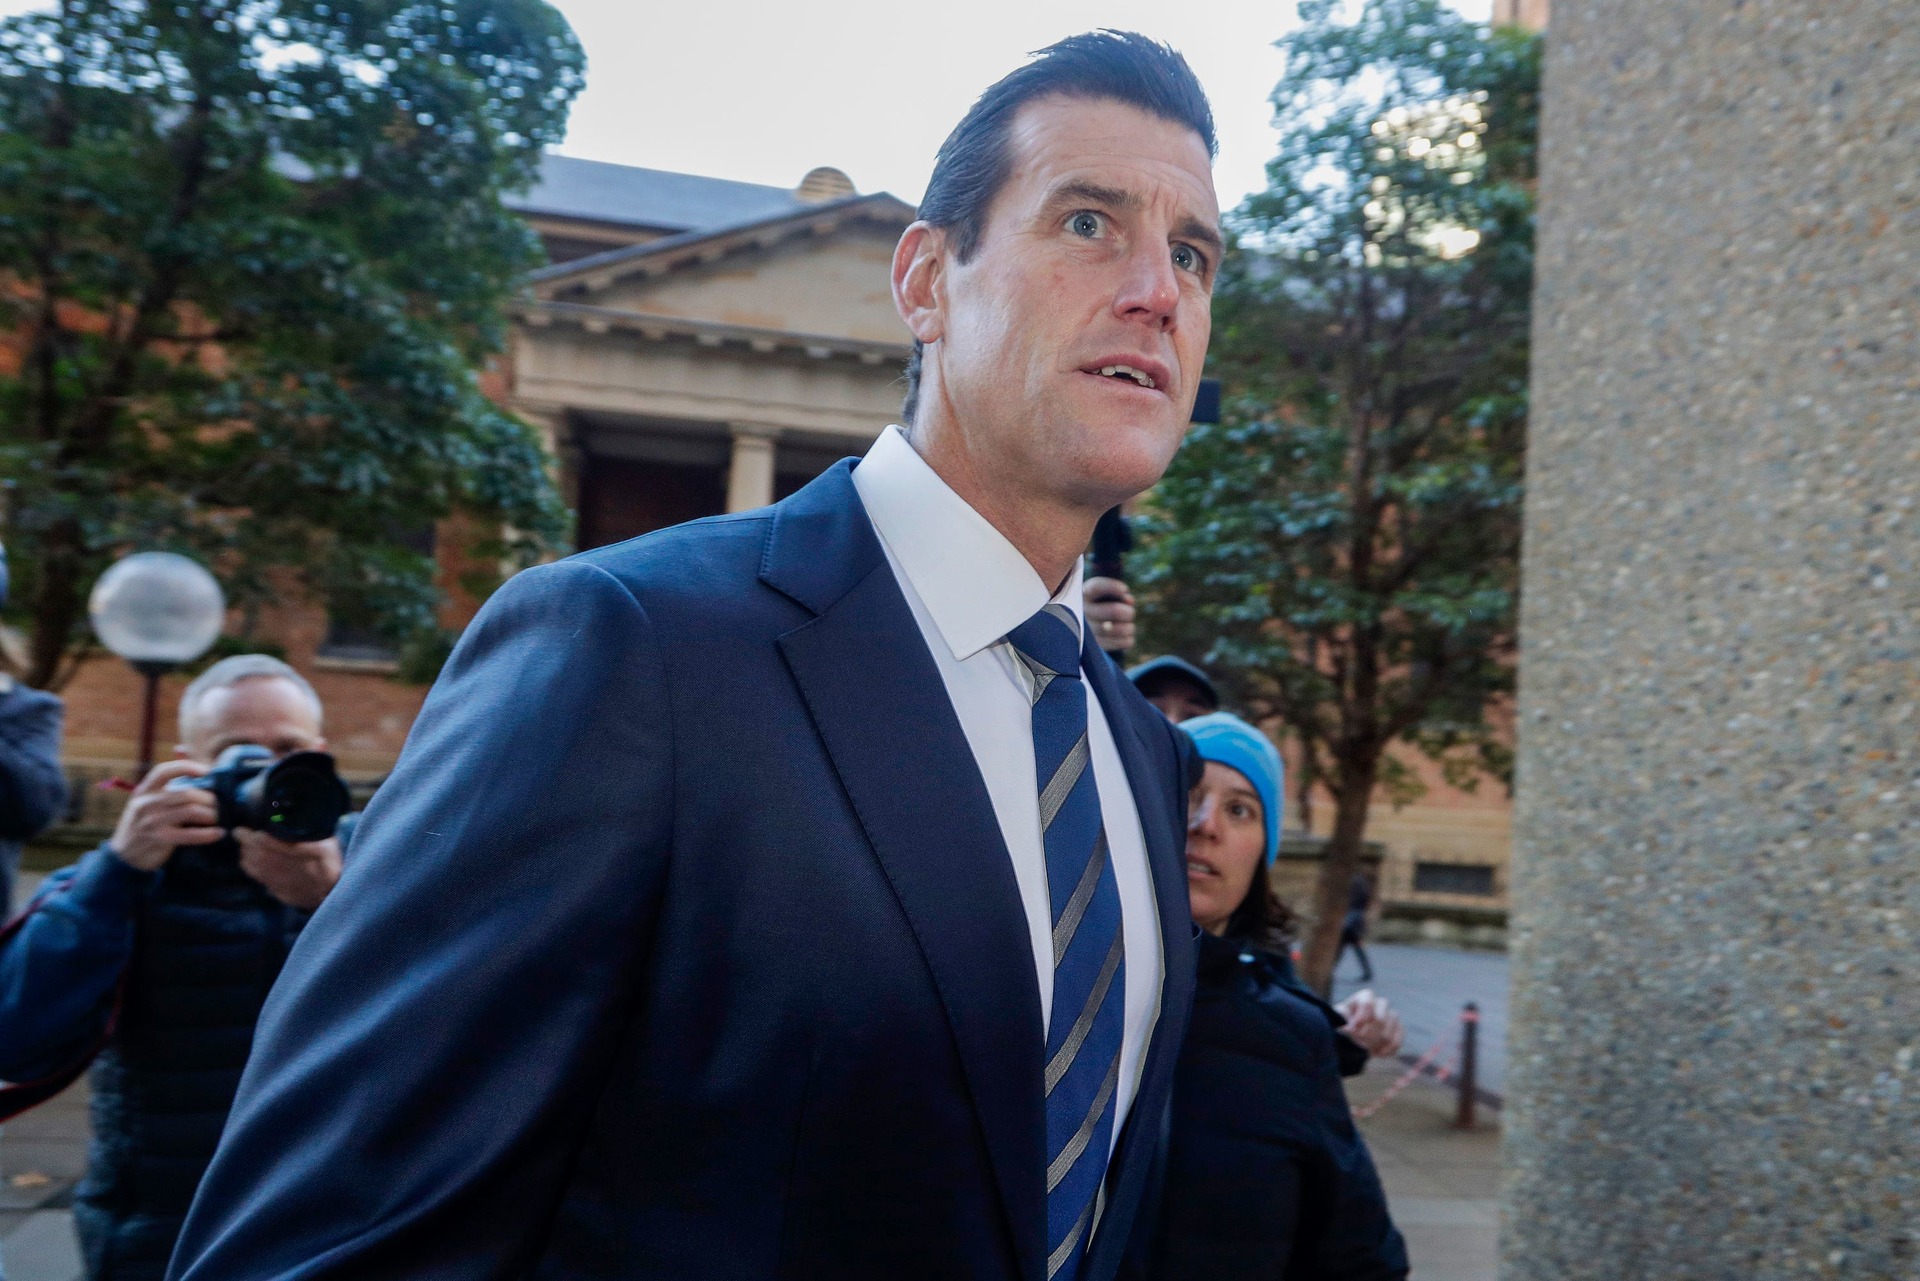 Ben Roberts-Smith committed a slew of war crimes while in Afghanistan, including the unlawful killings of unarmed prisoners, a judge has ruled (Rick Rycroft/AP)
